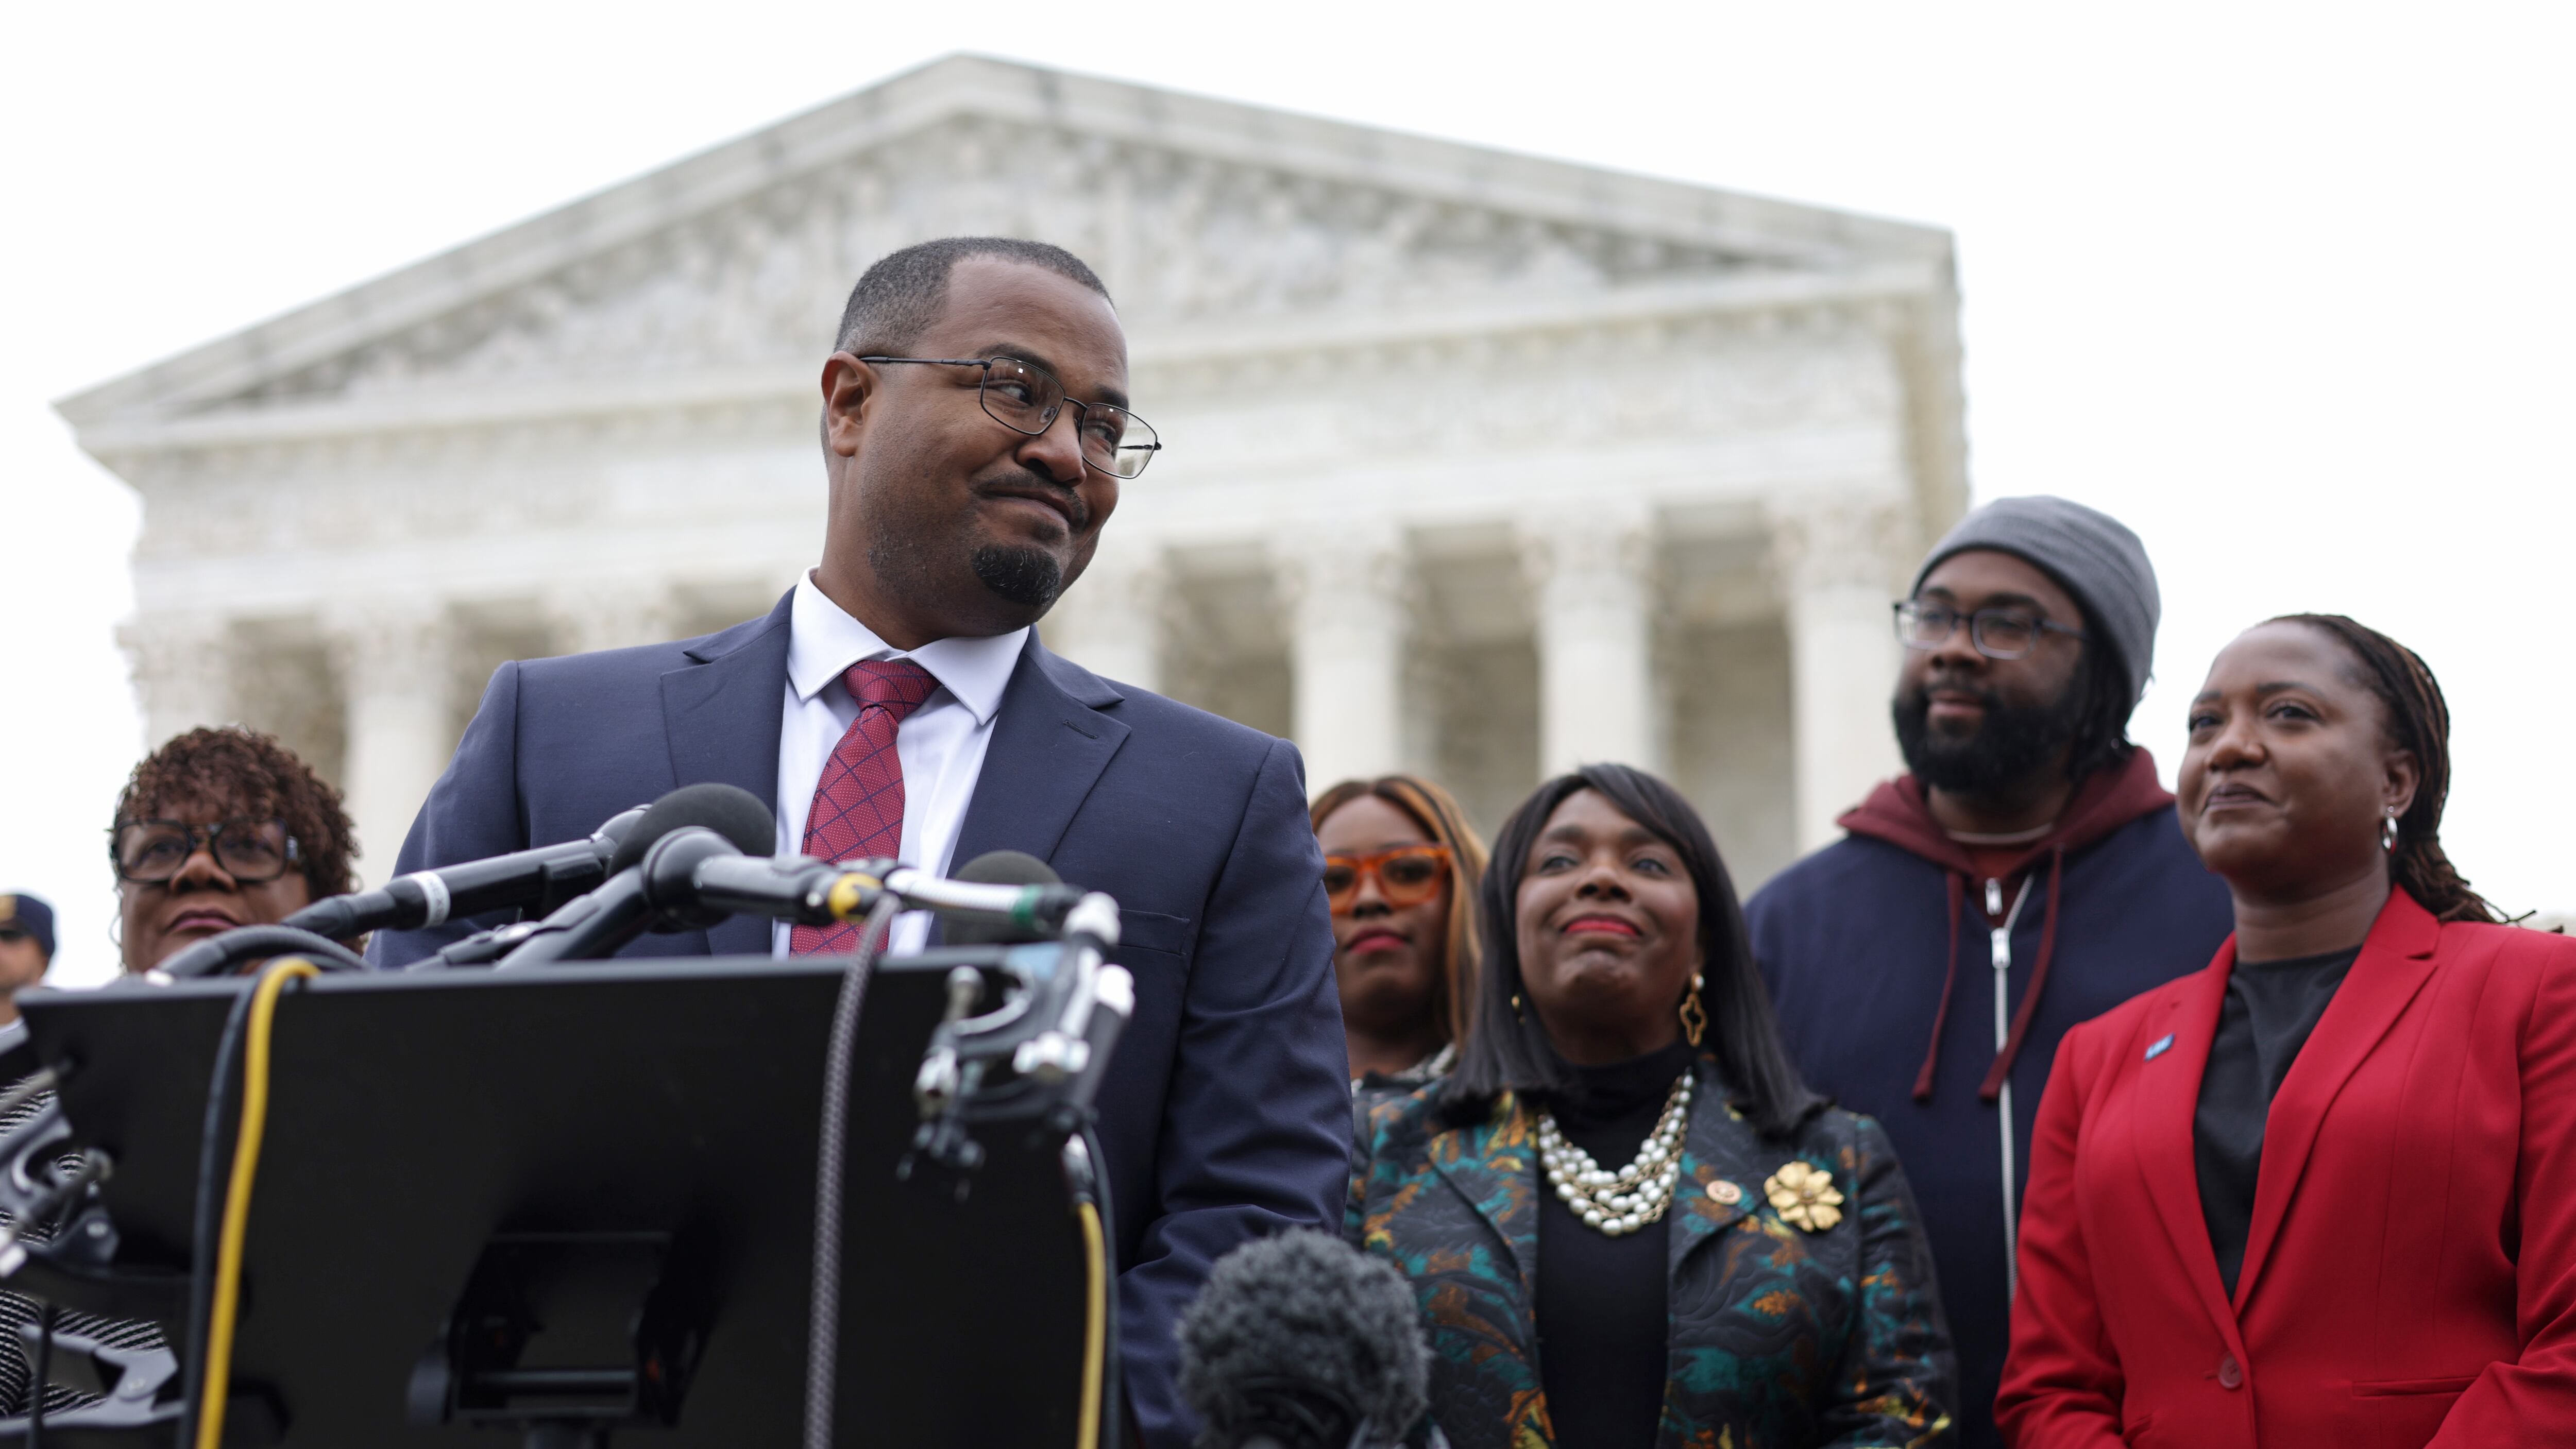 A man wearing glasses stands behind a podium with several microphones on it with several people standing behind him and the Supreme Court in the background.